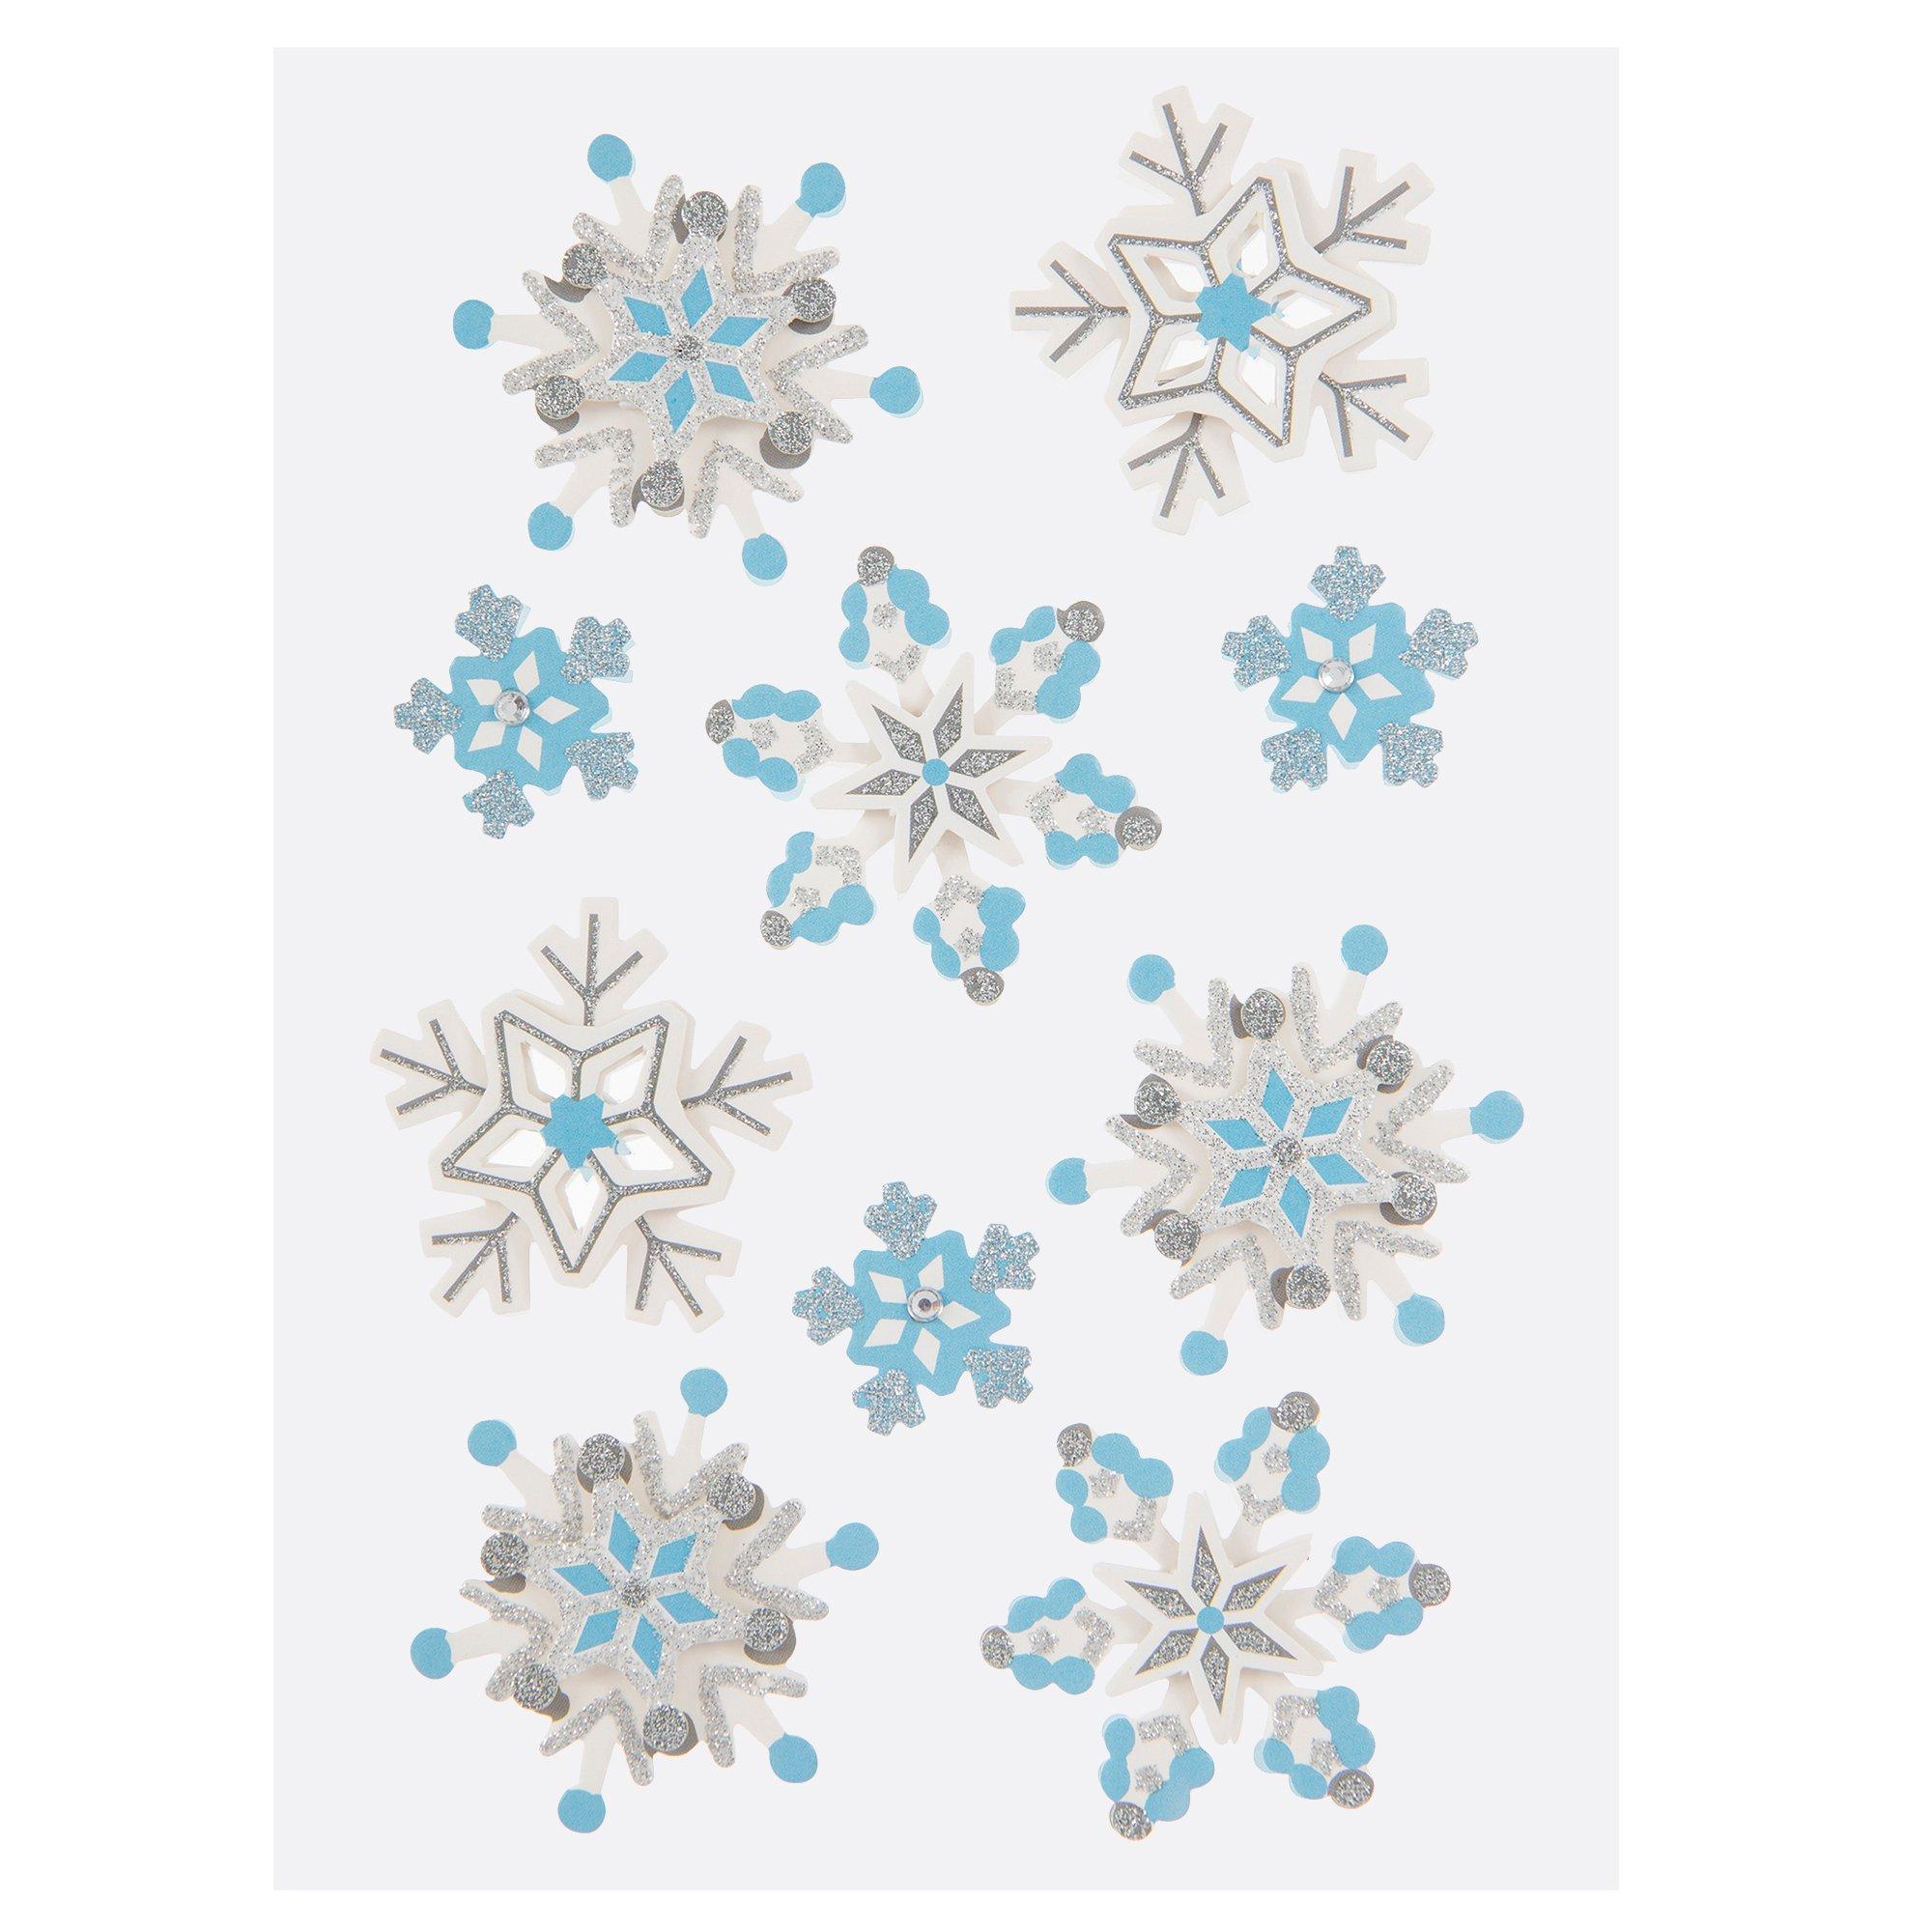 Let It Snow Stickers, Hobby Lobby, 946749